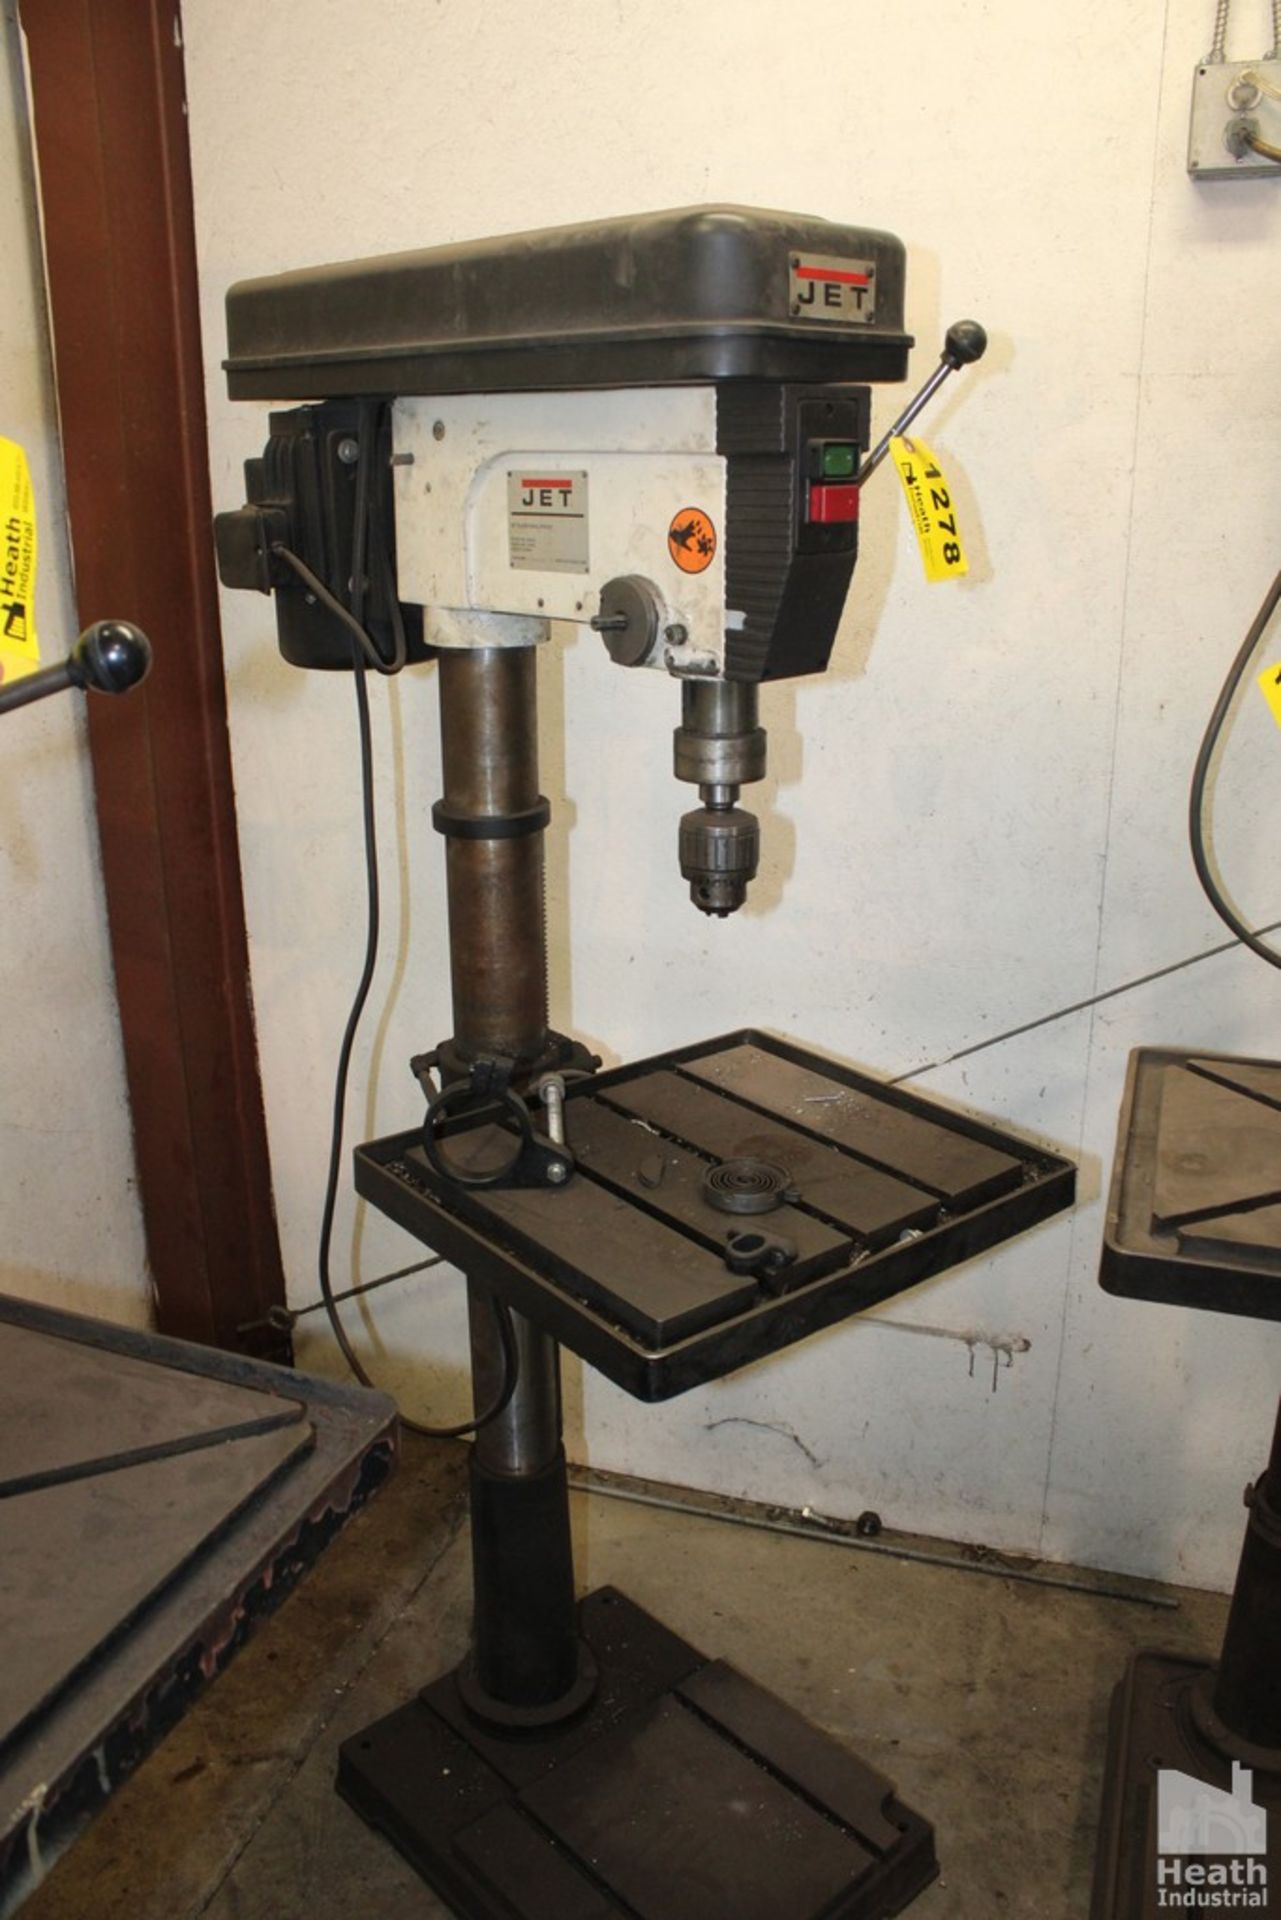 JET MODEL J-2550 20" FLOOR STANDING DRILL PRESS 17" X 19" SLOTTED TABLE WITH OIL TROUGH S/N